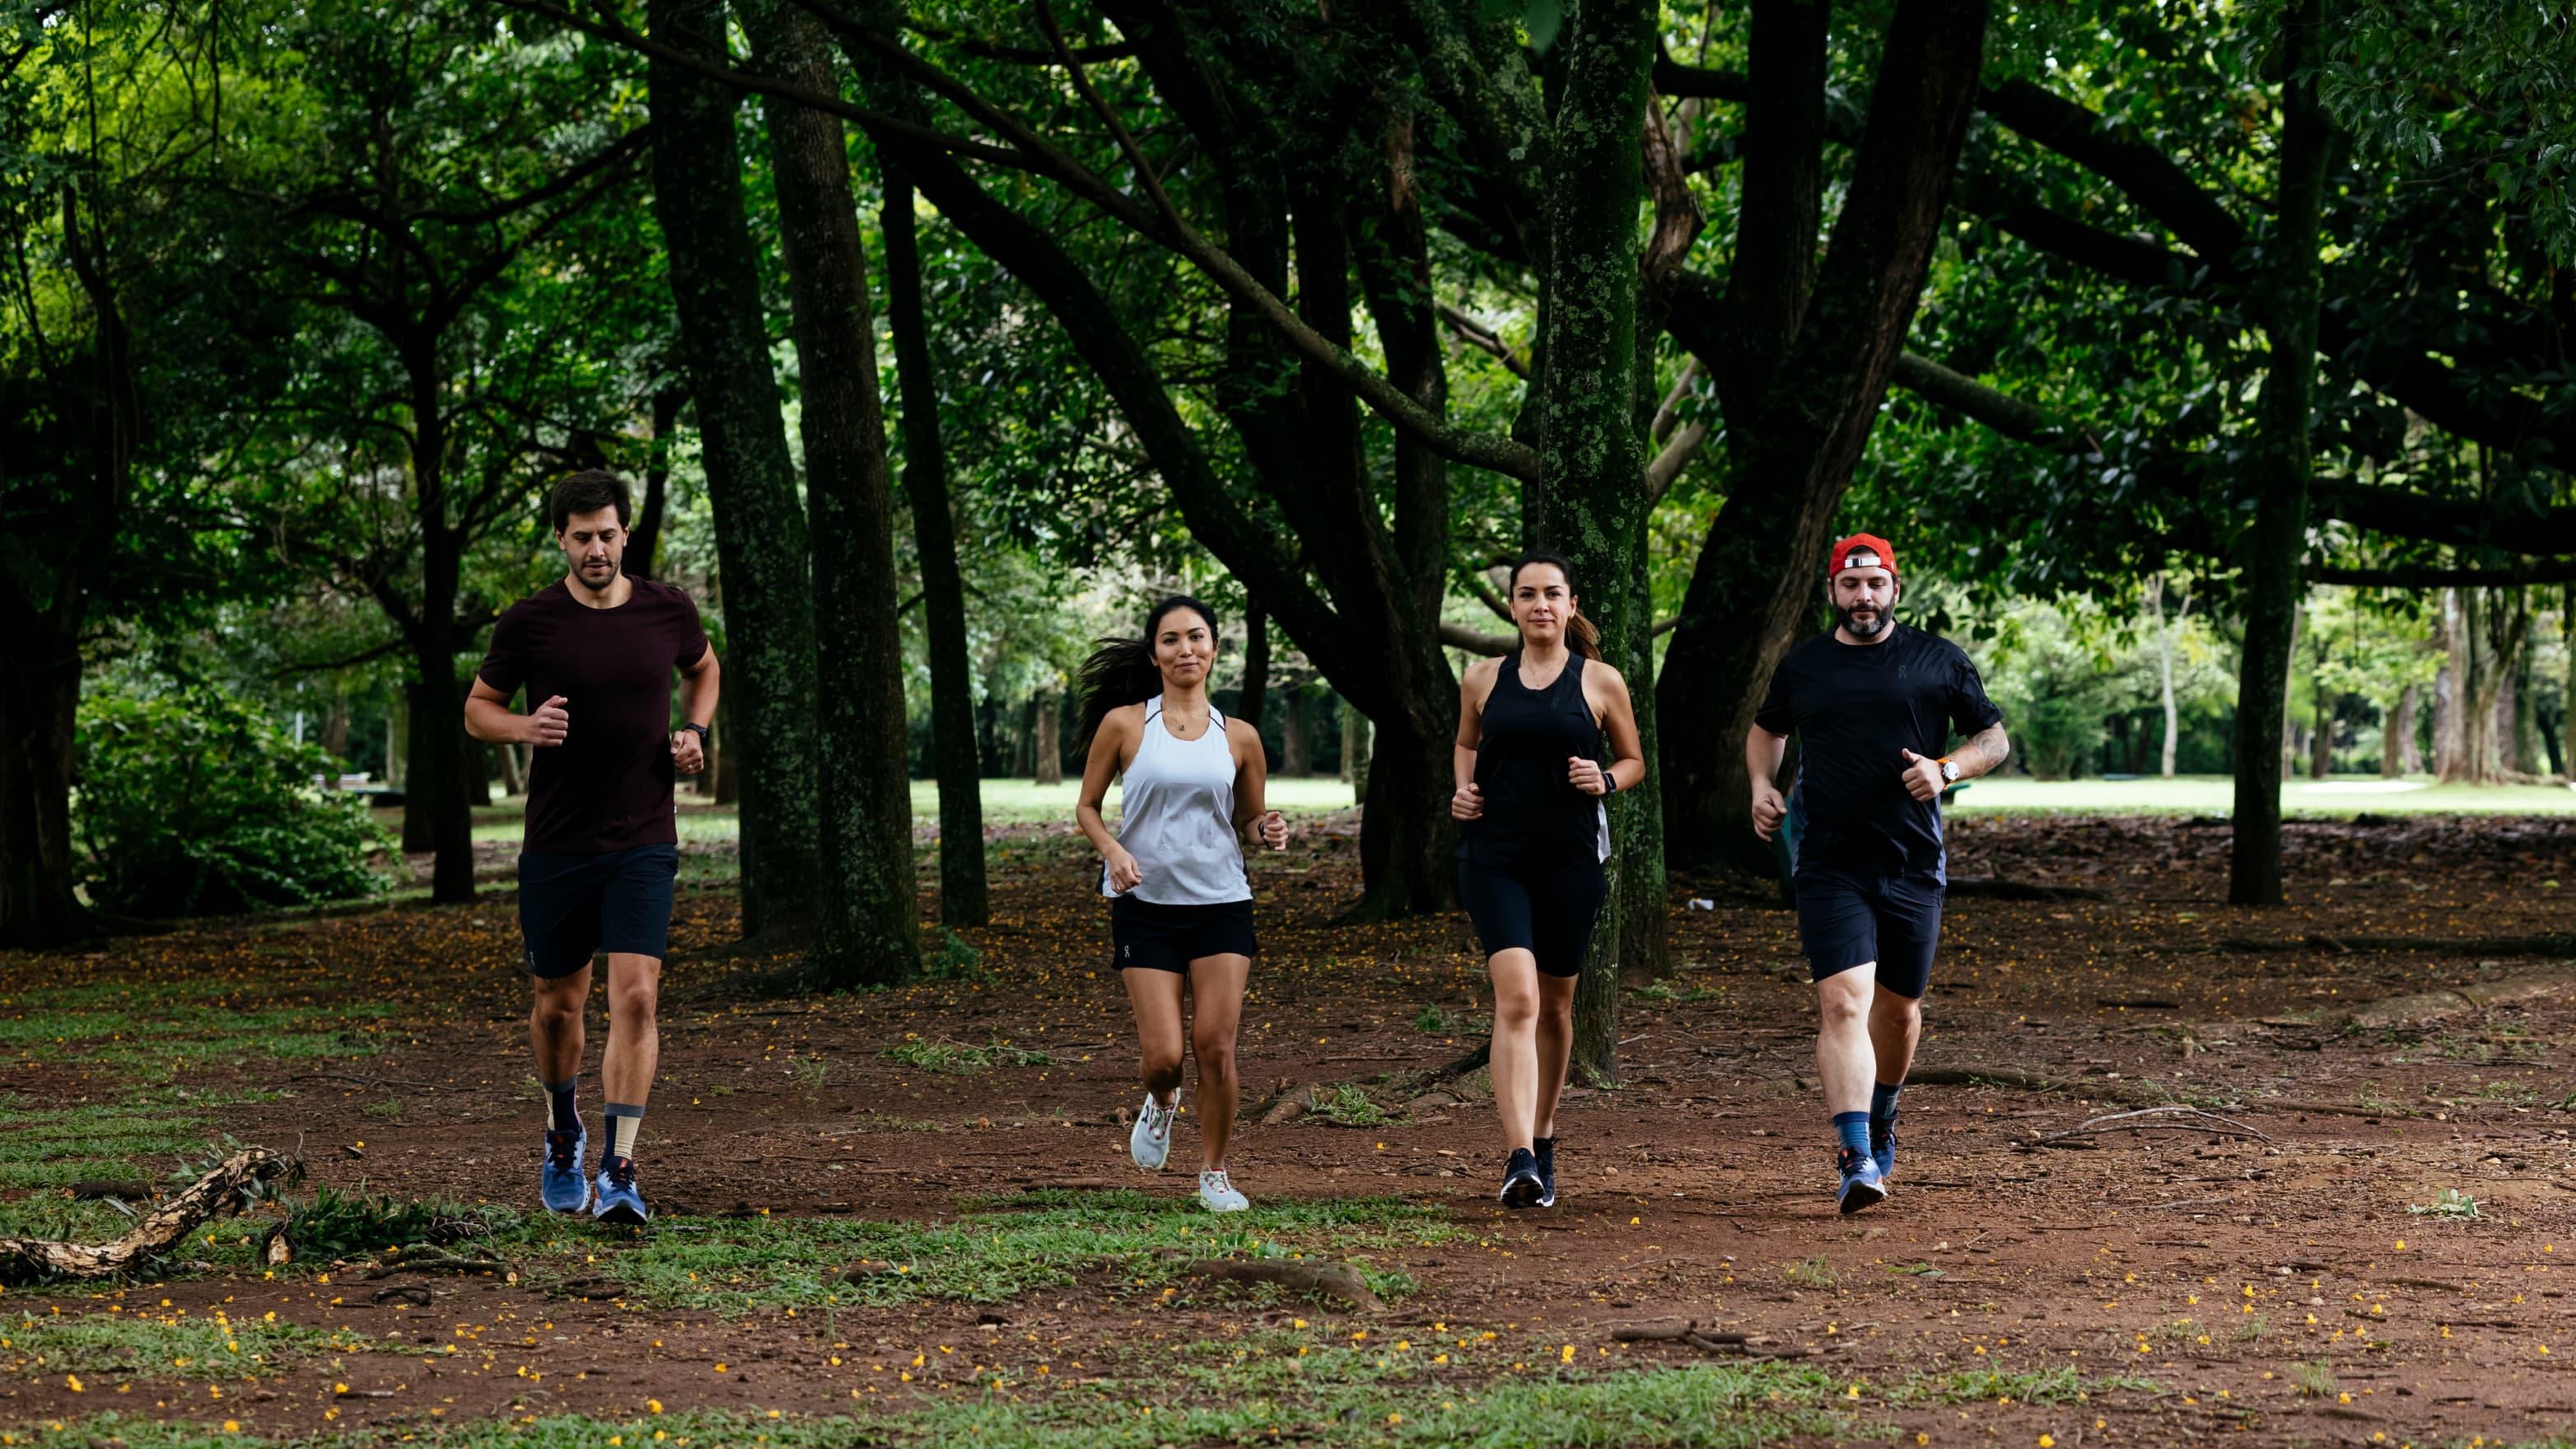 A group of people jogging in the forest